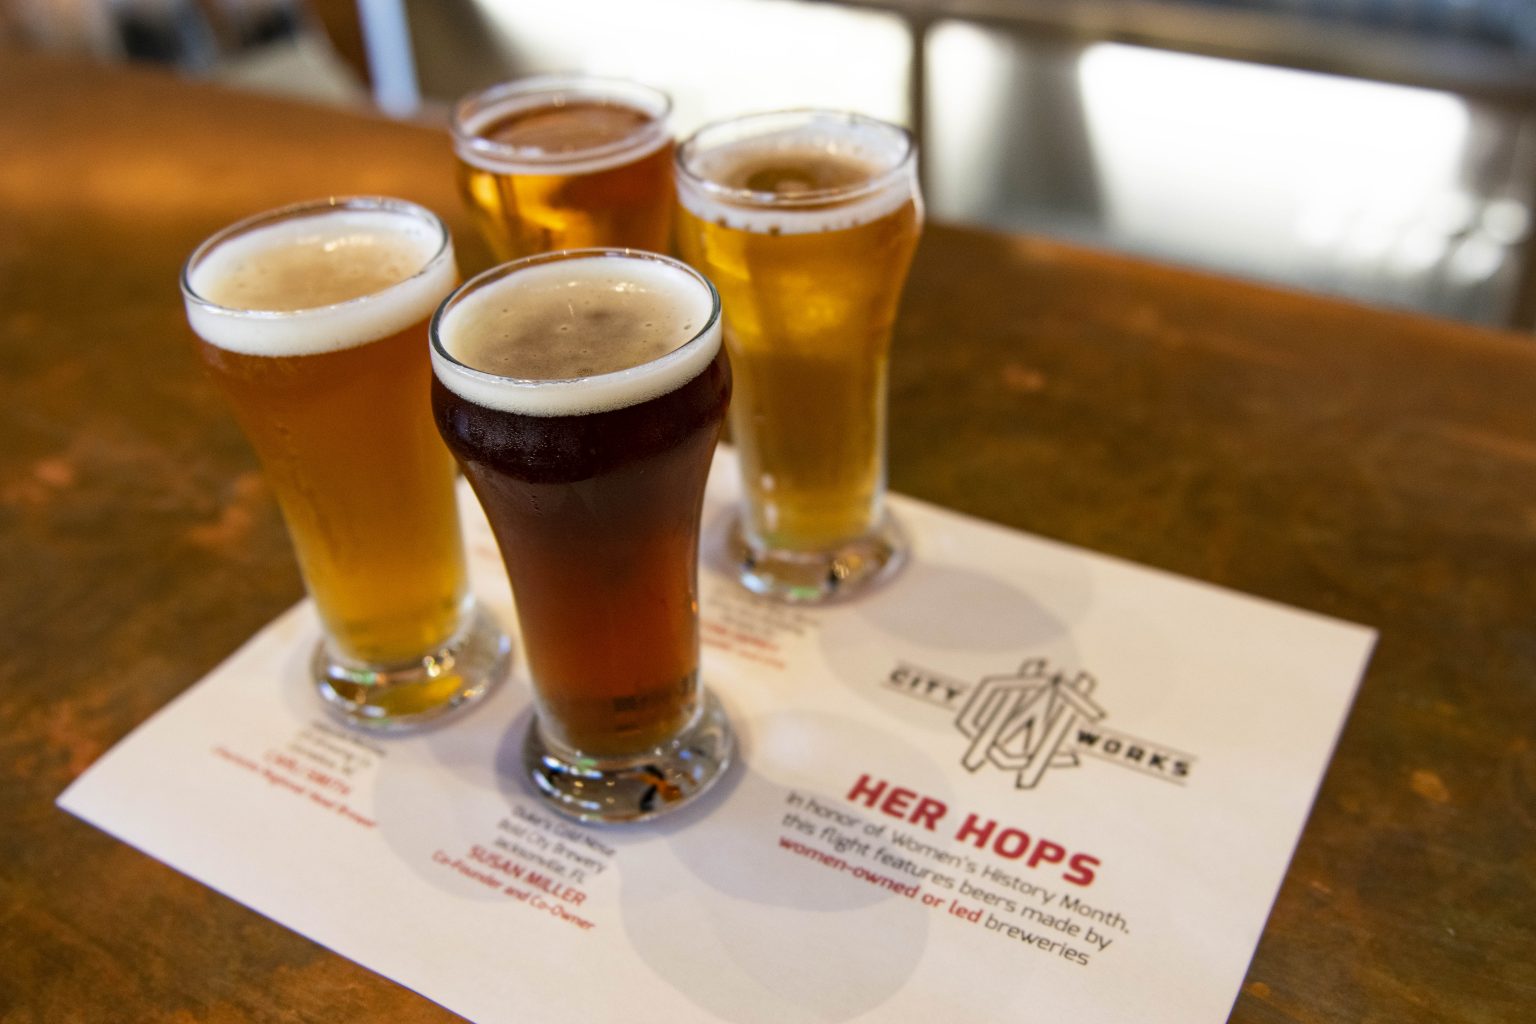 Her Hops at City Works Eatery & Pour House